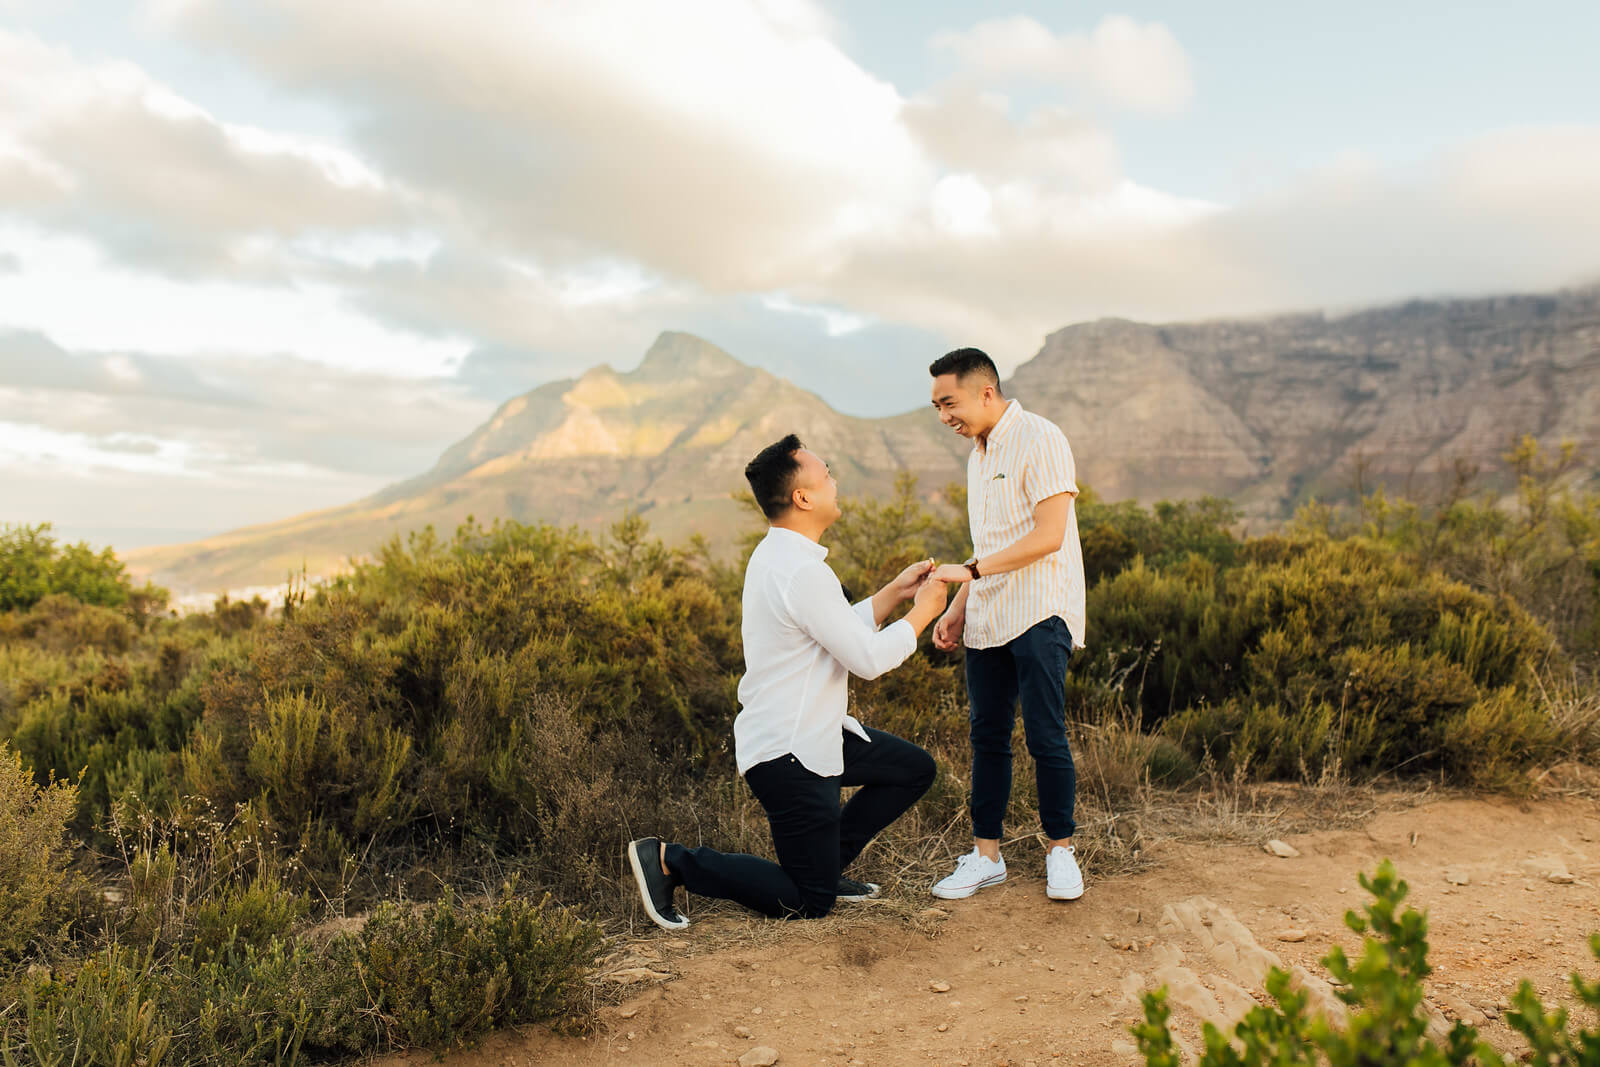 A proposal moment on top of a mountain in Cape Town